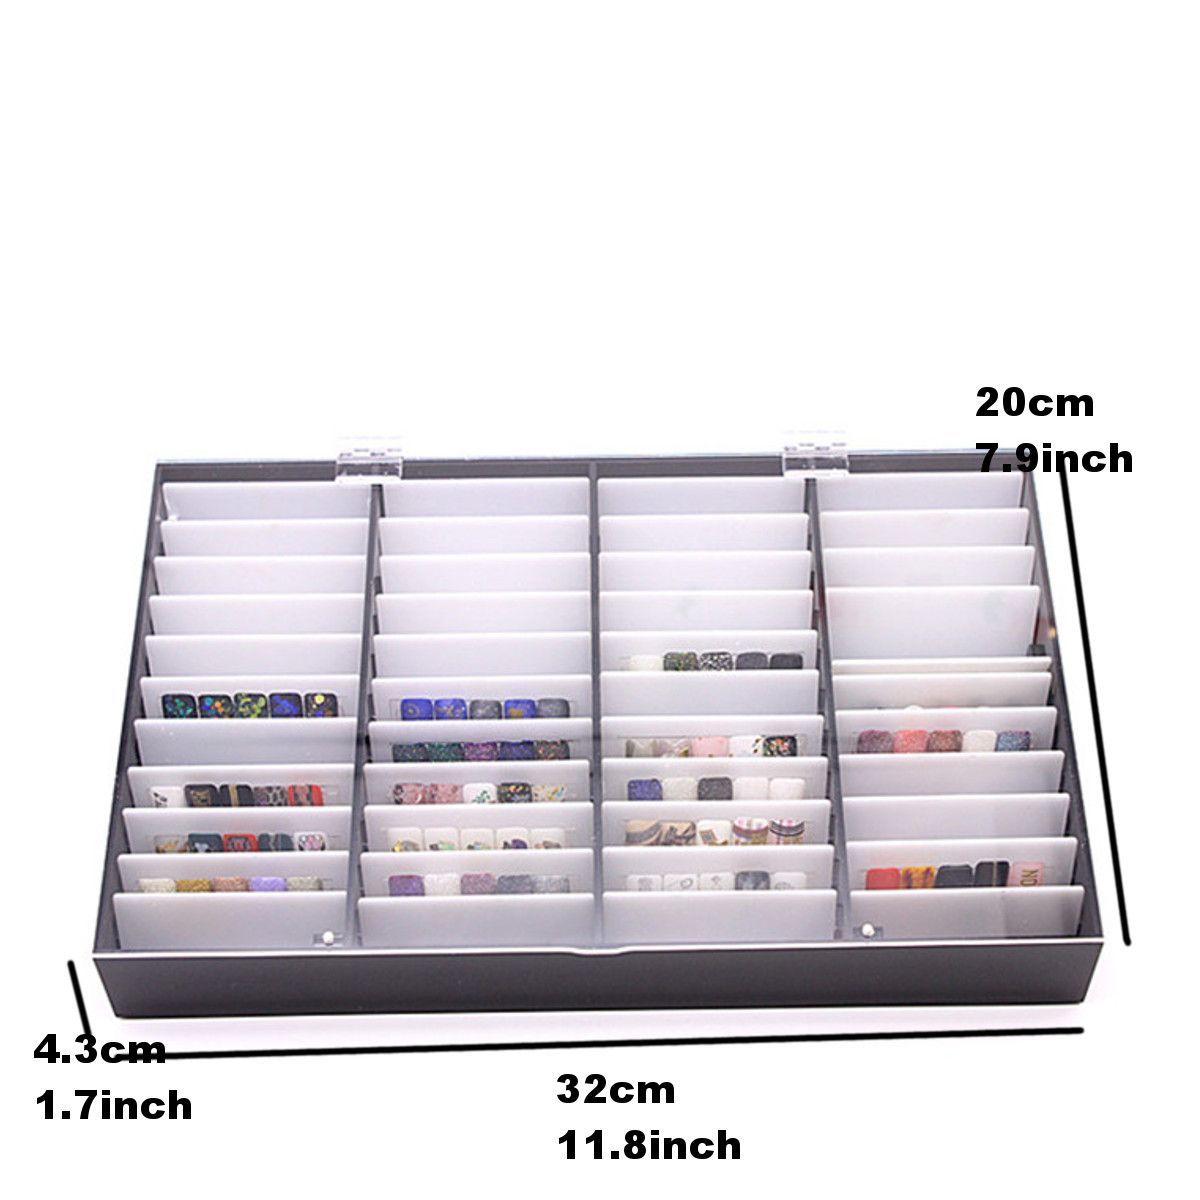 44-Grids-Empty-Nail-Tips-Storage-Box-Clear-Nail-Art-Decoration-Container-Case-Display-1585521